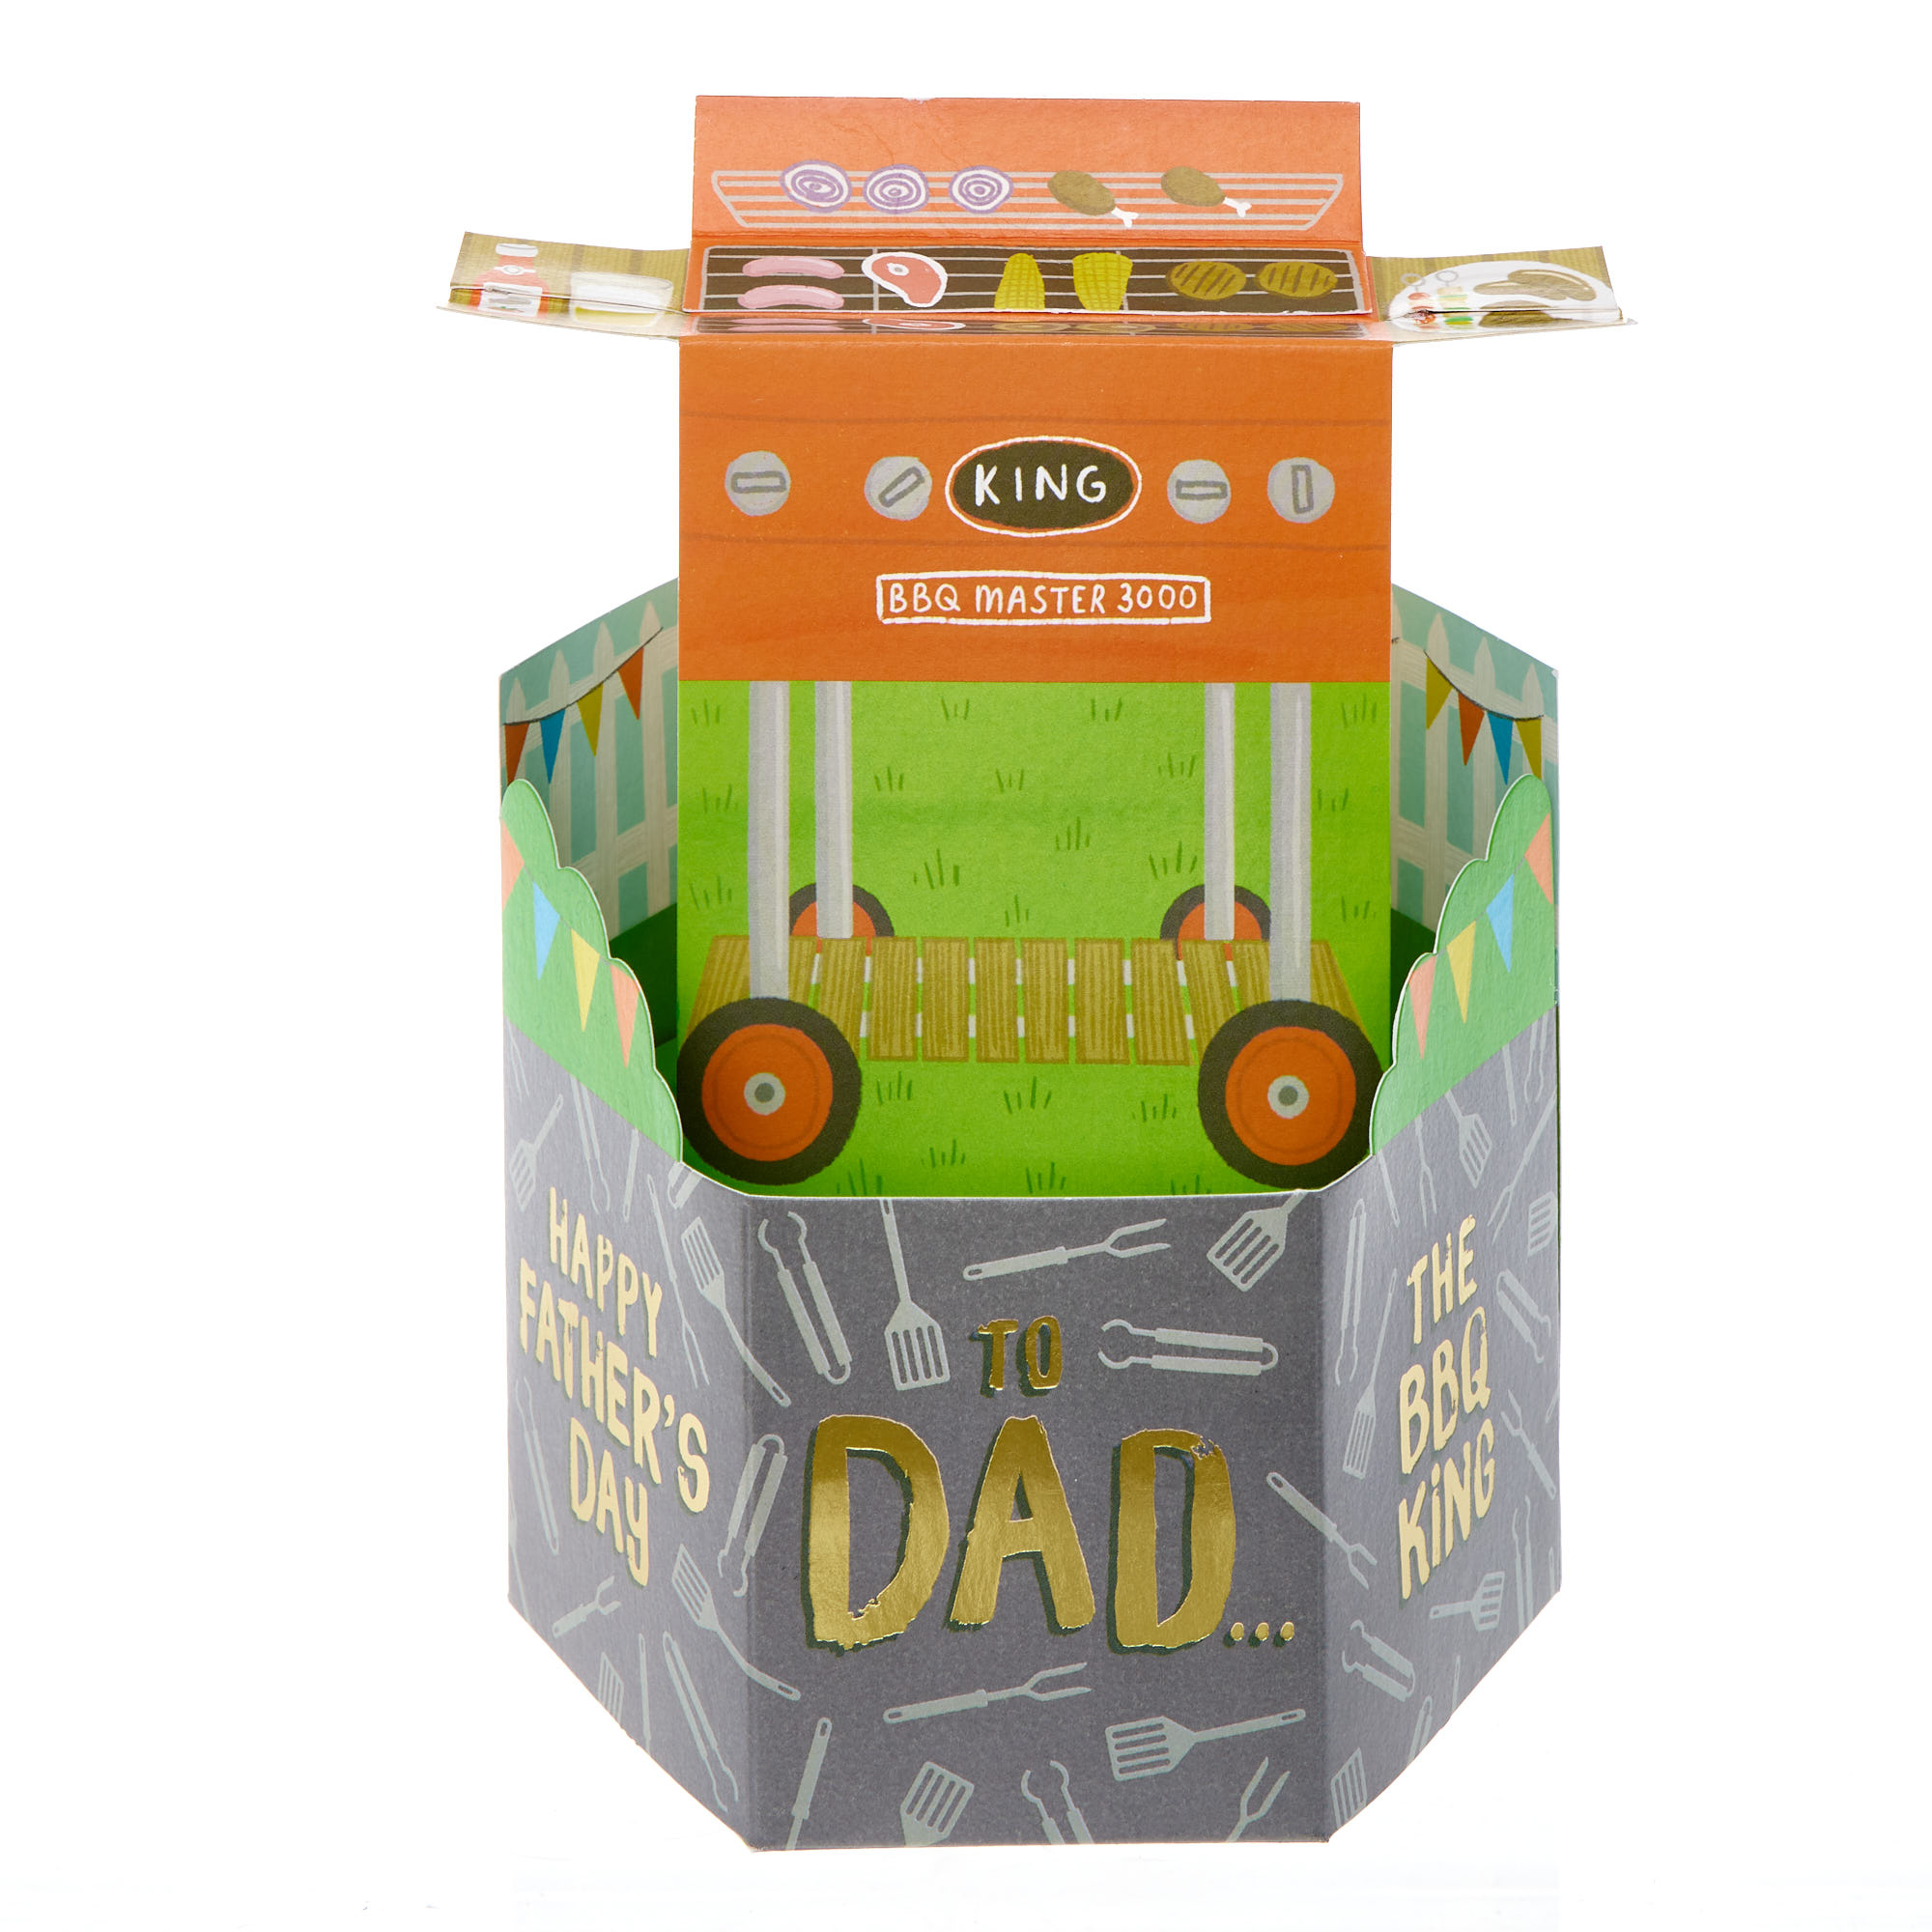 Dad The BBQ King 3D Pop-Up Father's Day Card